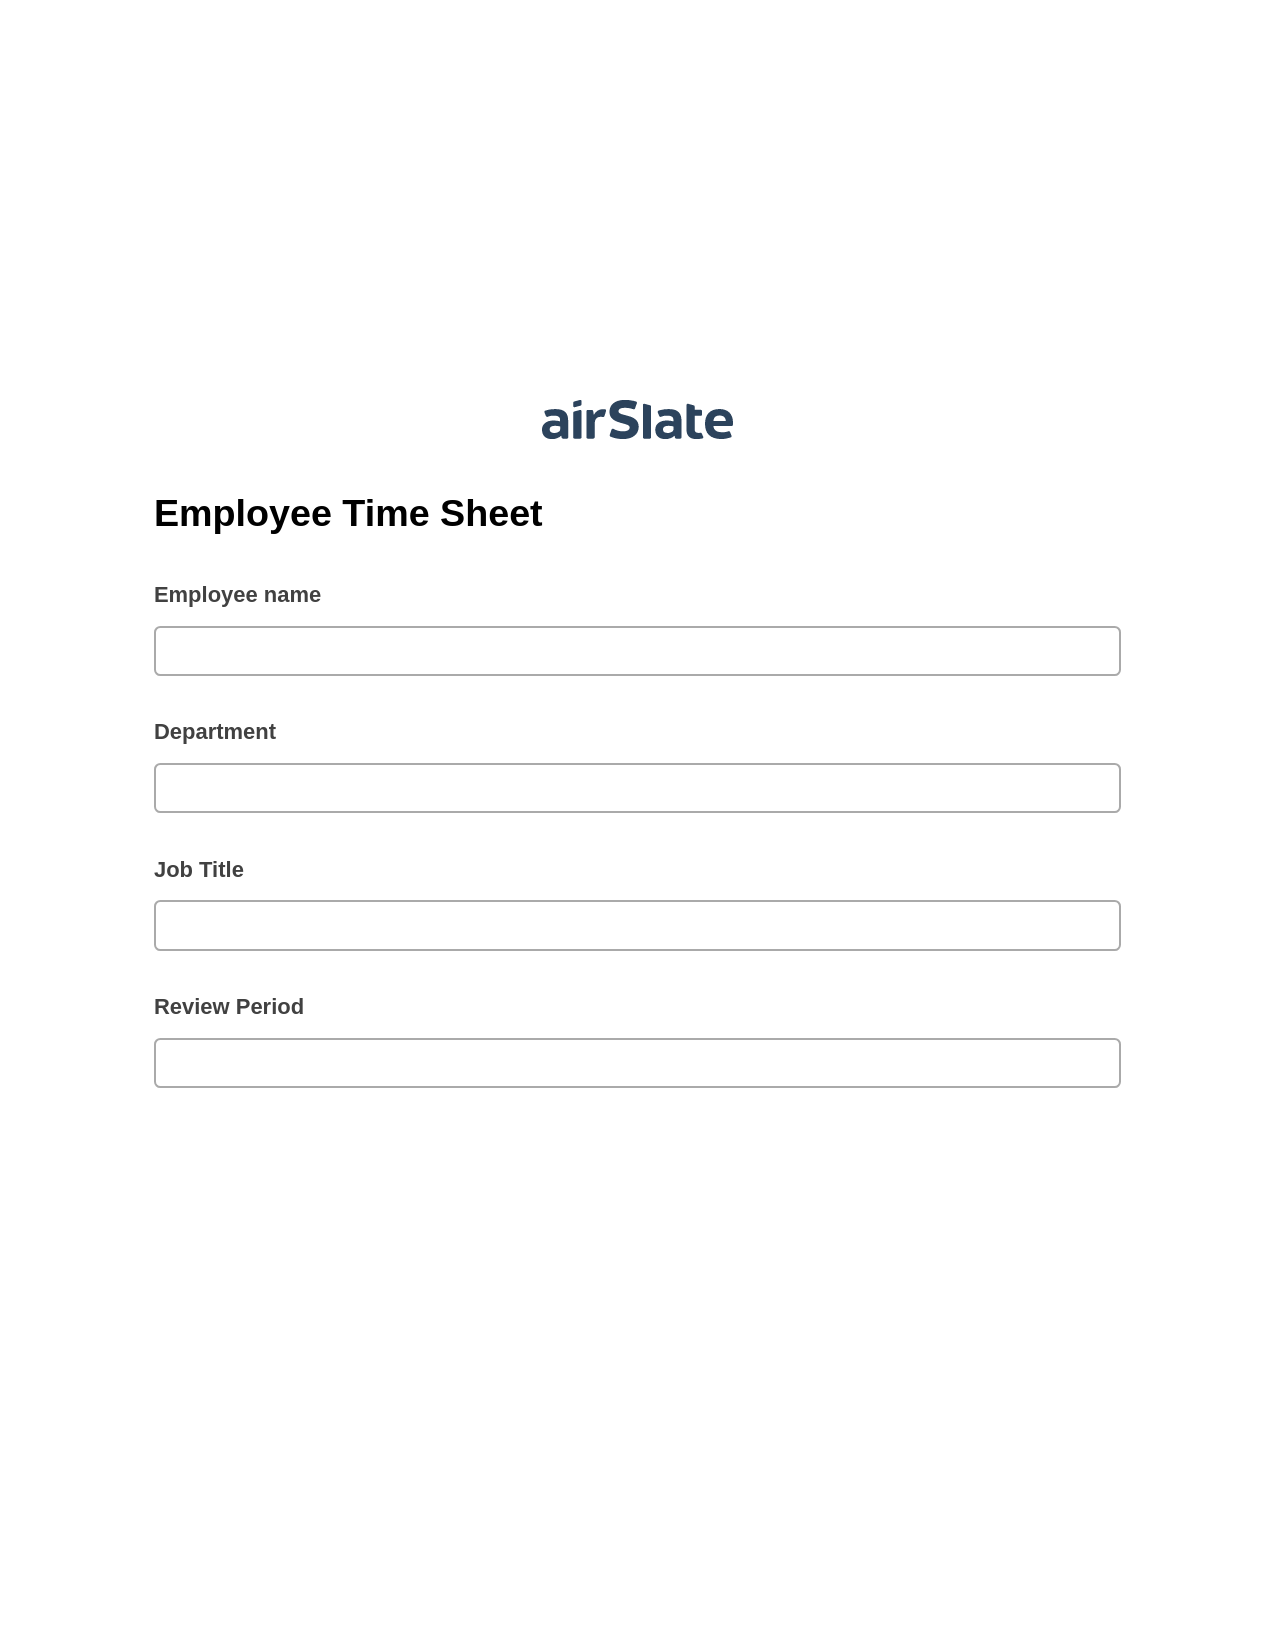 Employee Time Sheet Pre-fill Document Bot, Remove Tags From Slate Bot, Archive to Box Bot